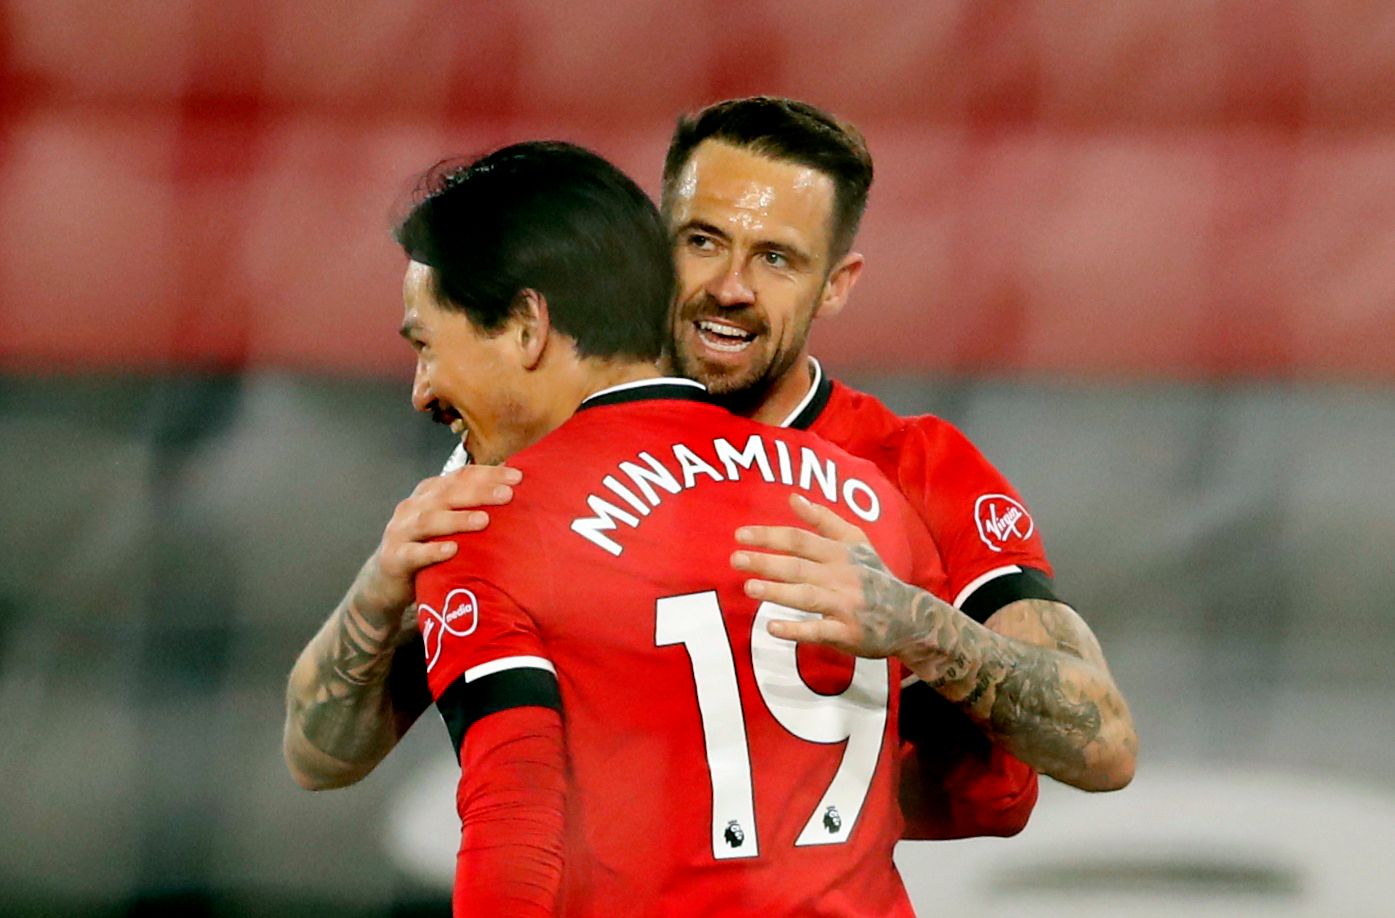 Soccer Football - Premier League - Southampton v Crystal Palace - St Mary's Stadium, Southampton, Britain - May 11, 2021 Southampton's Danny Ings celebrates scoring their third goal with Takumi Minamino Pool via REUTERS/Andrew Boyers EDITORIAL USE ONLY. No use with unauthorized audio, video, data, fixture lists, club/league logos or 'live' services. Online in-match use limited to 75 images, no video emulation. No use in betting, games or single club /league/player publications.  Please contact y